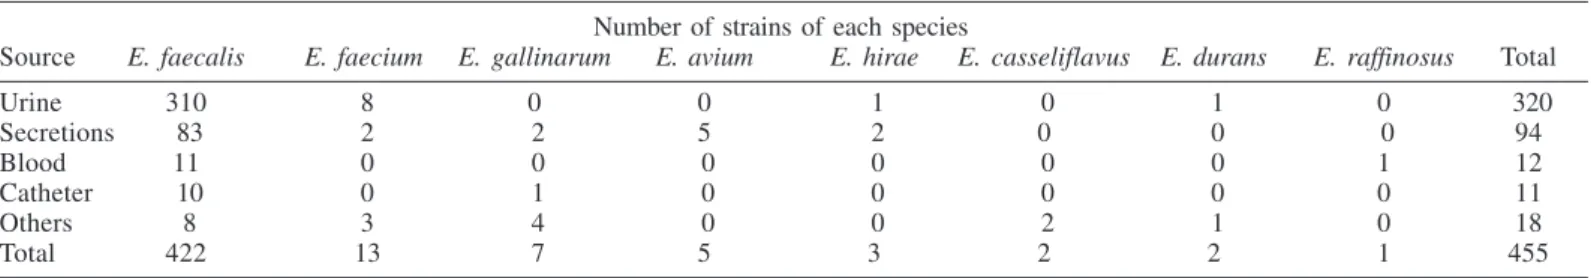 Table 1 shows the distribution of enterococcal species according to the source of isolation